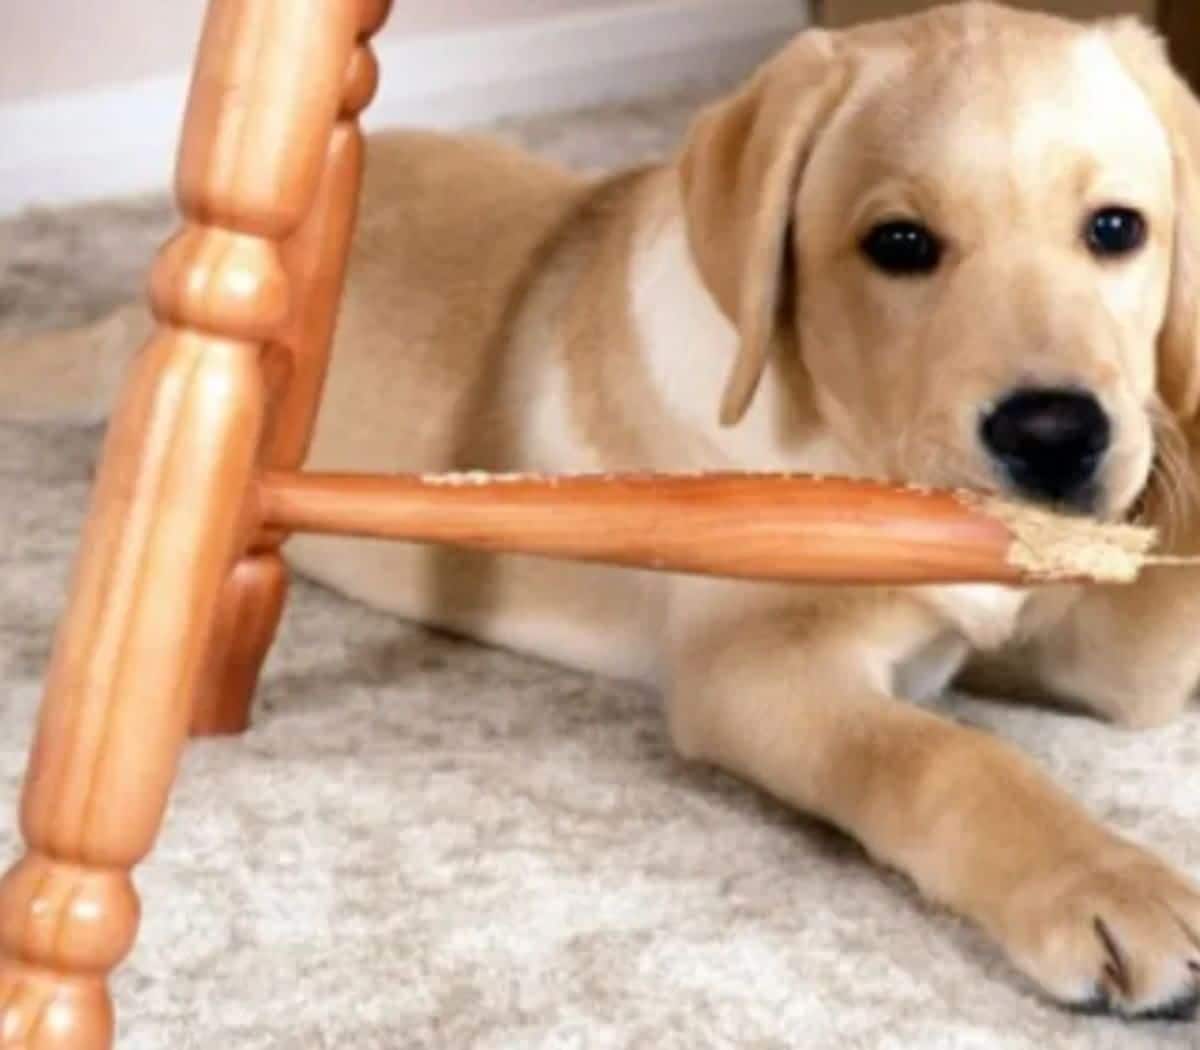 golden retriever puppy laying on the floor next to a chewed up wooden chair leg